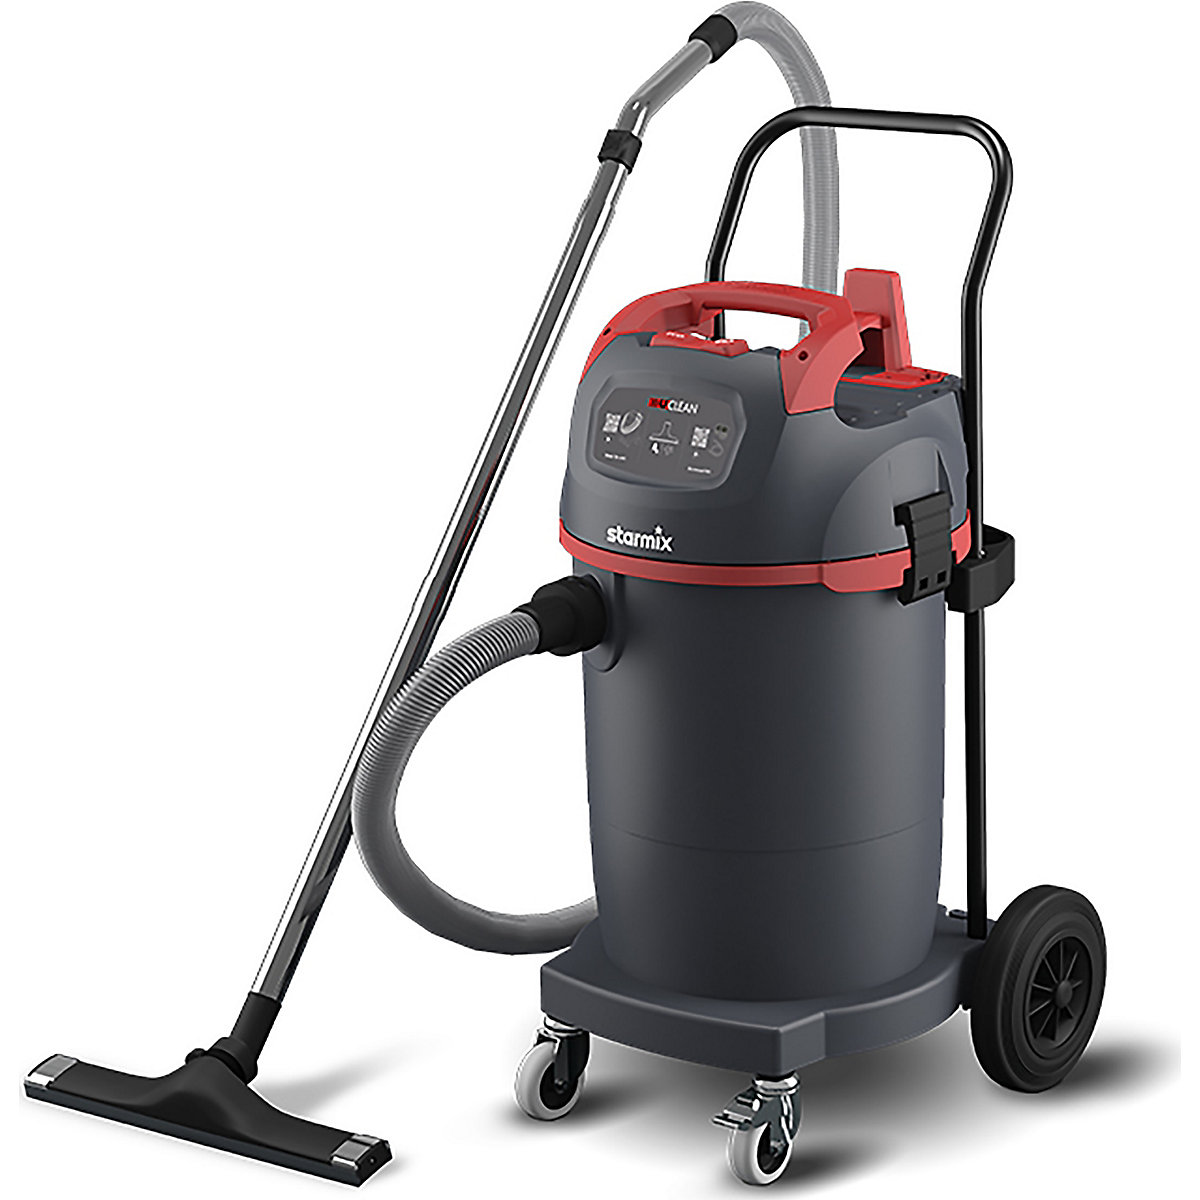 Wet and dry vacuum cleaner for cleaning with professional accessories - starmix